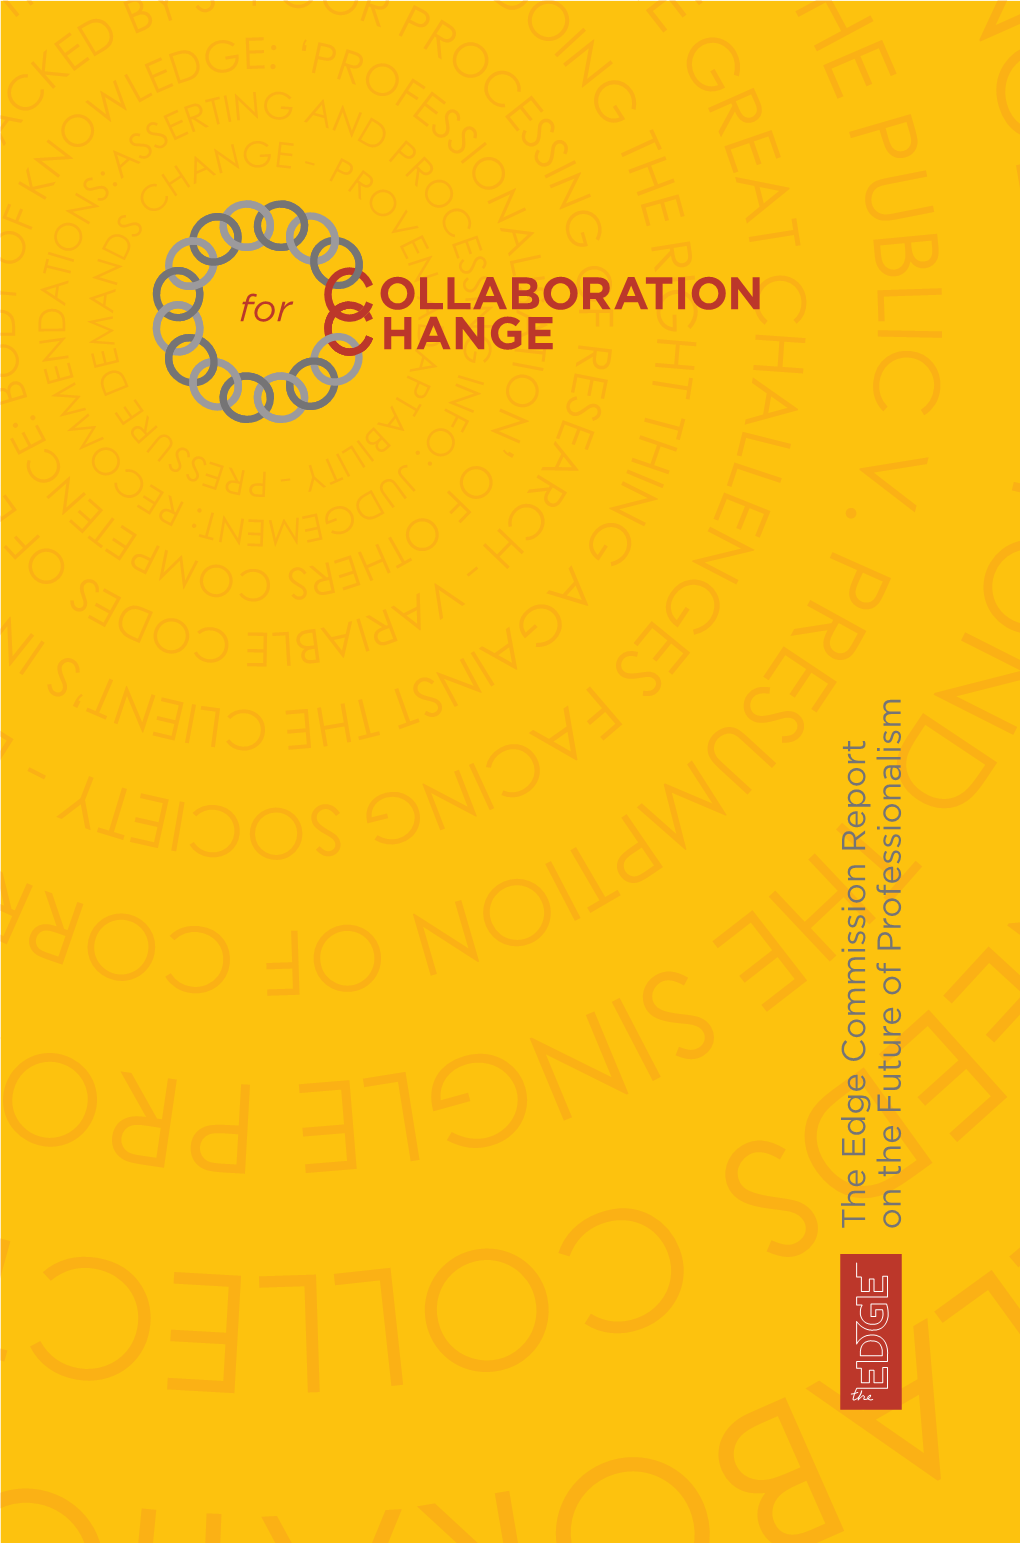 Collaboration for Change the Edge Commission Report on the Future of Professionalism